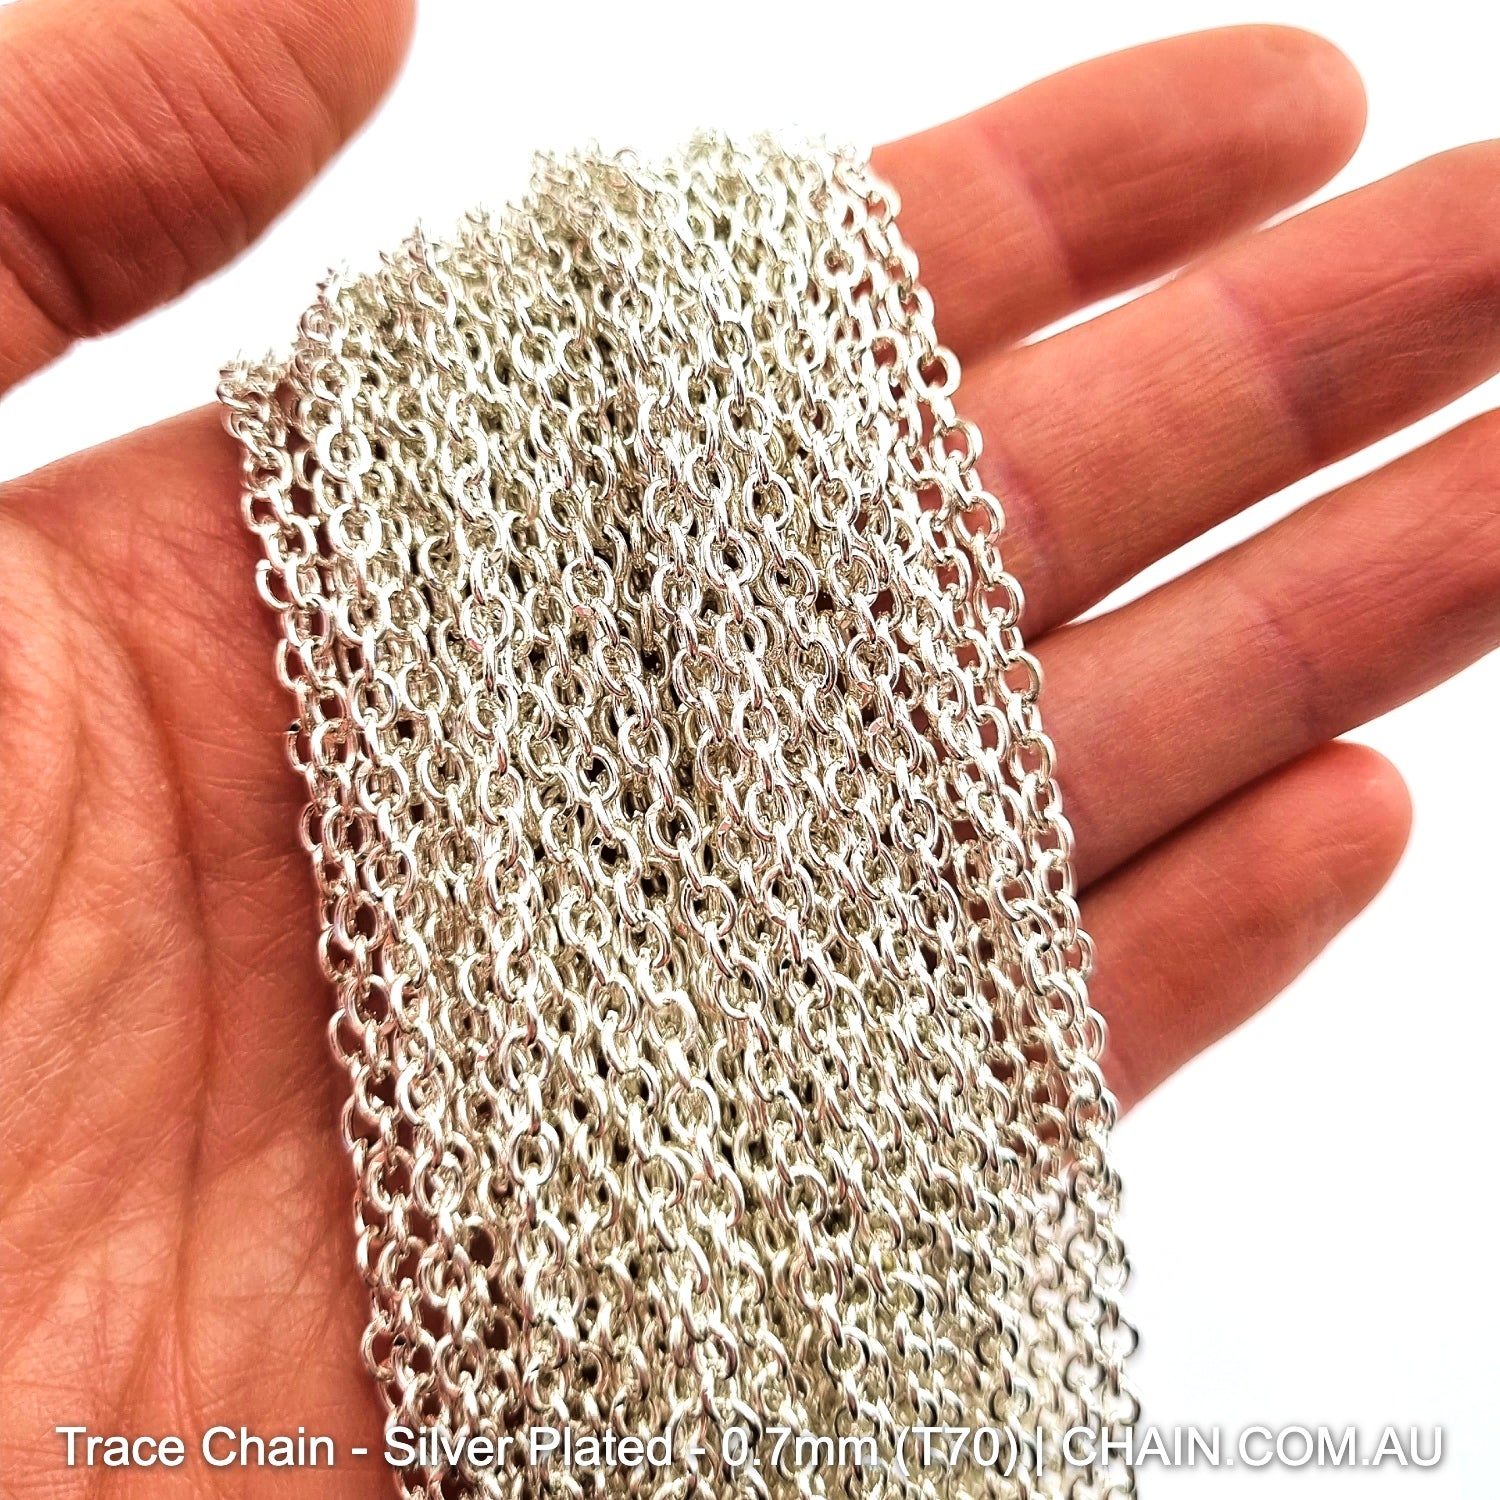 Trace Chain in a Silver Plated Finish. Size: 0.7mm, T70. Jewellery Chain, Australia wide shipping. Shop chain.com.au